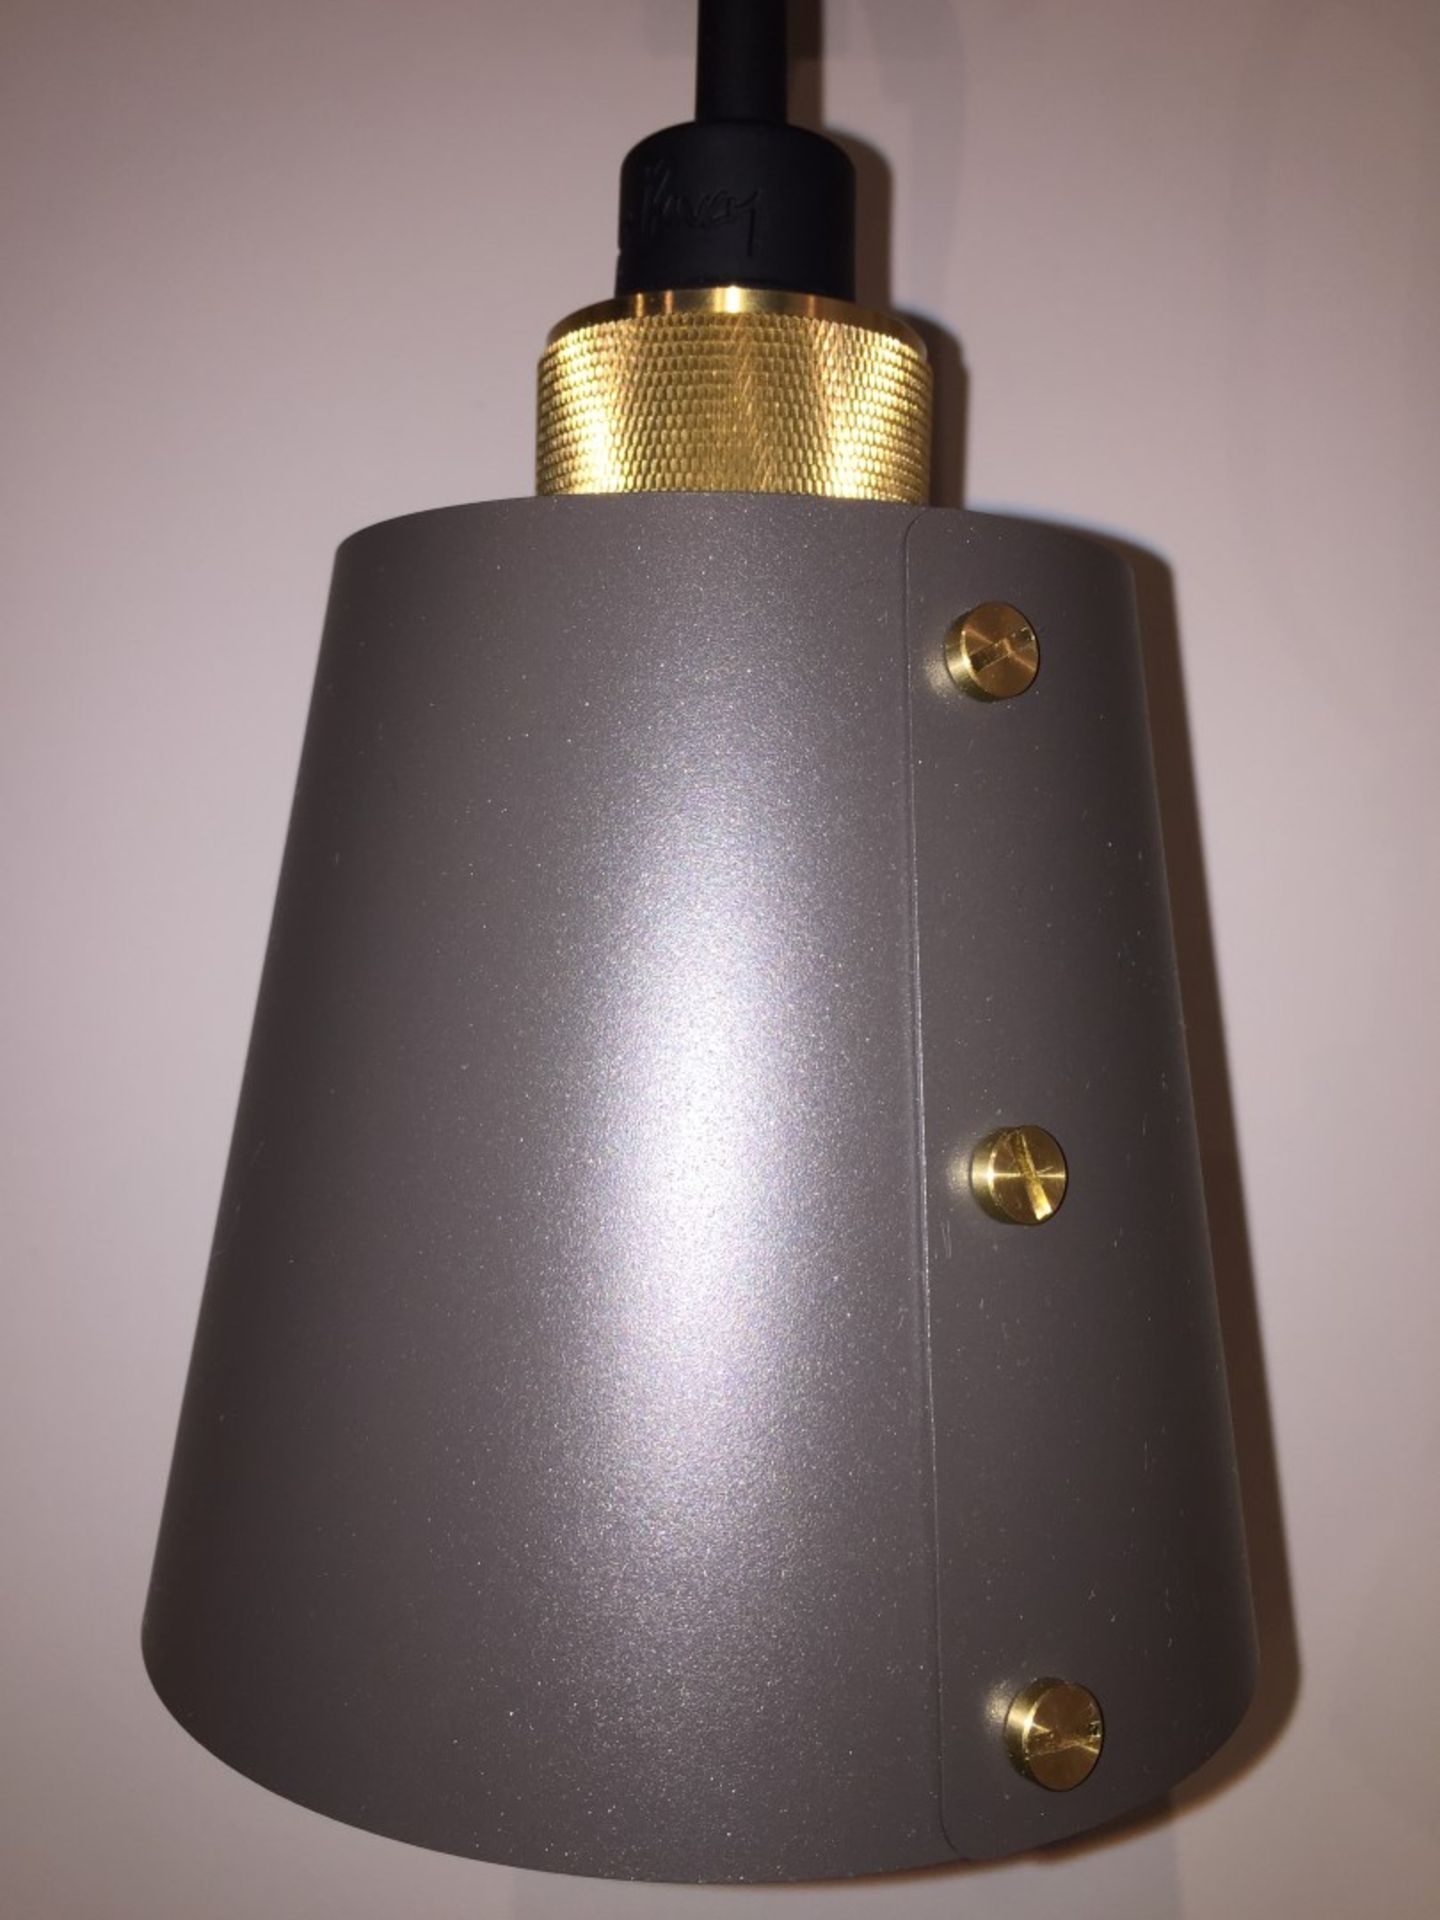 1 x BUSTER + PUNCH Hooked Wall Light With Metal Shade - Ref: WS/FF160D - CL204 - Location: London Ci - Image 5 of 10